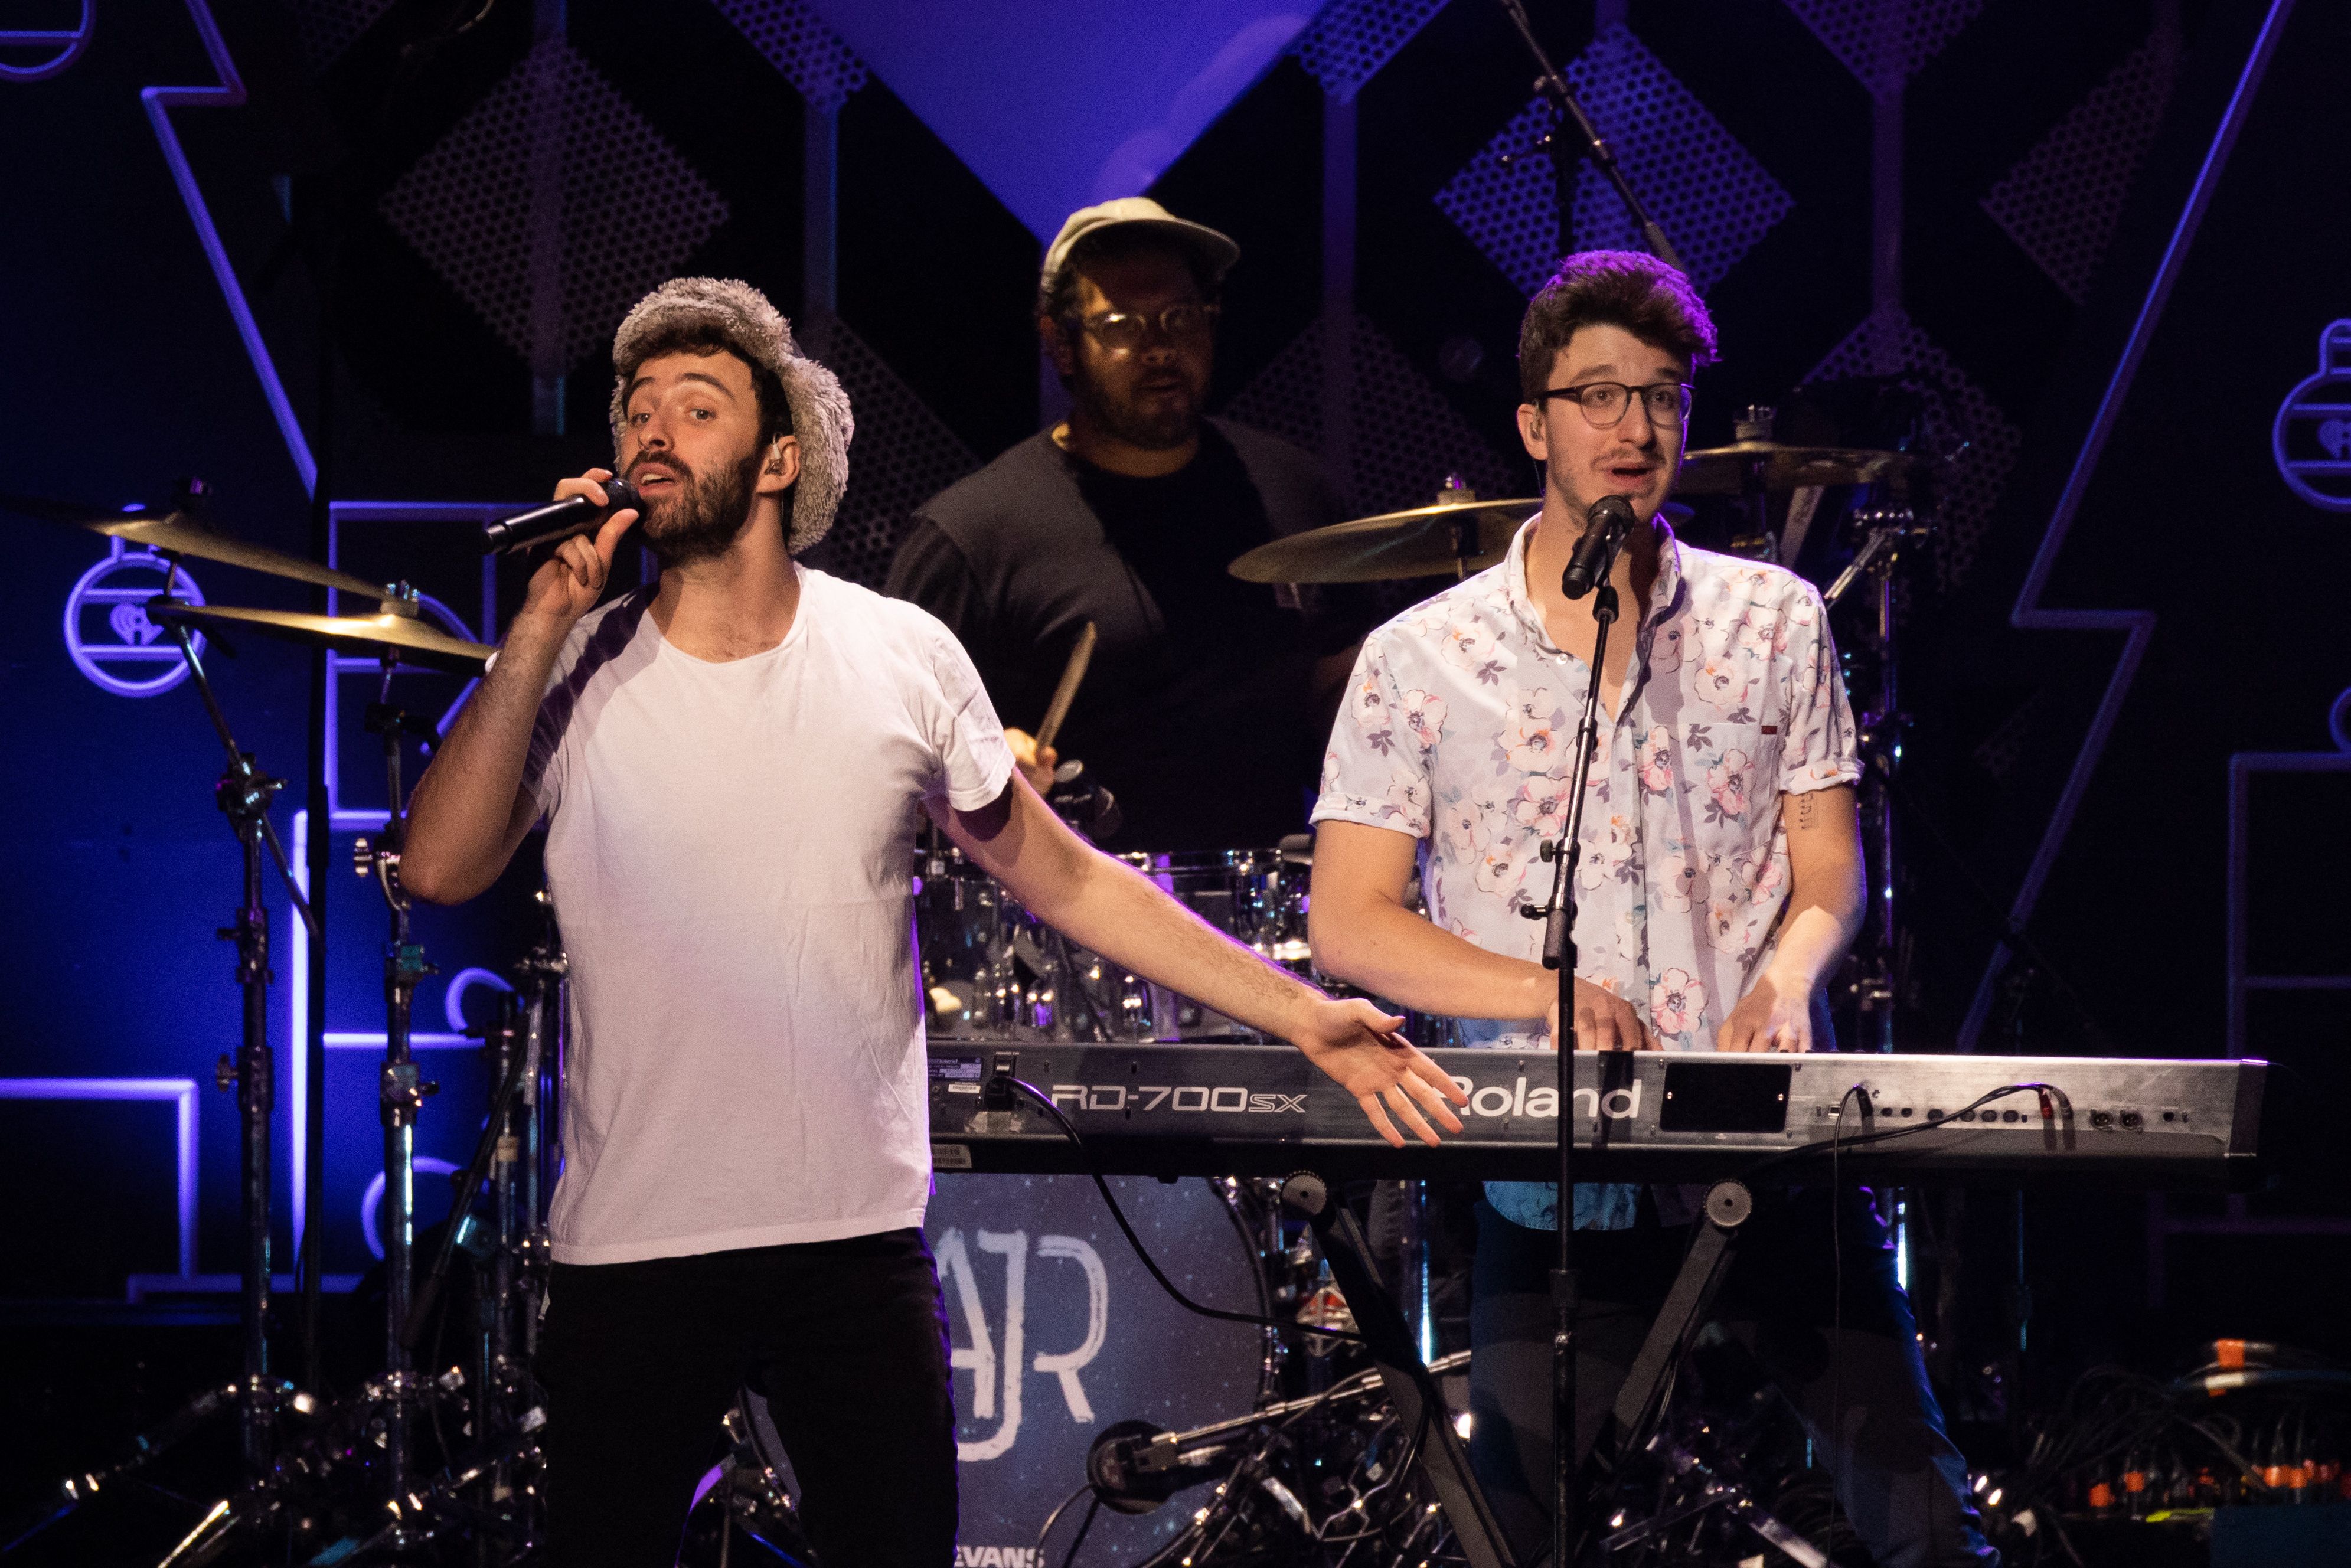 Jack Met and Ryan Met of AJR perform during Z100's iHeartRadio Jingle Ball 2021 at Madison Square Garden